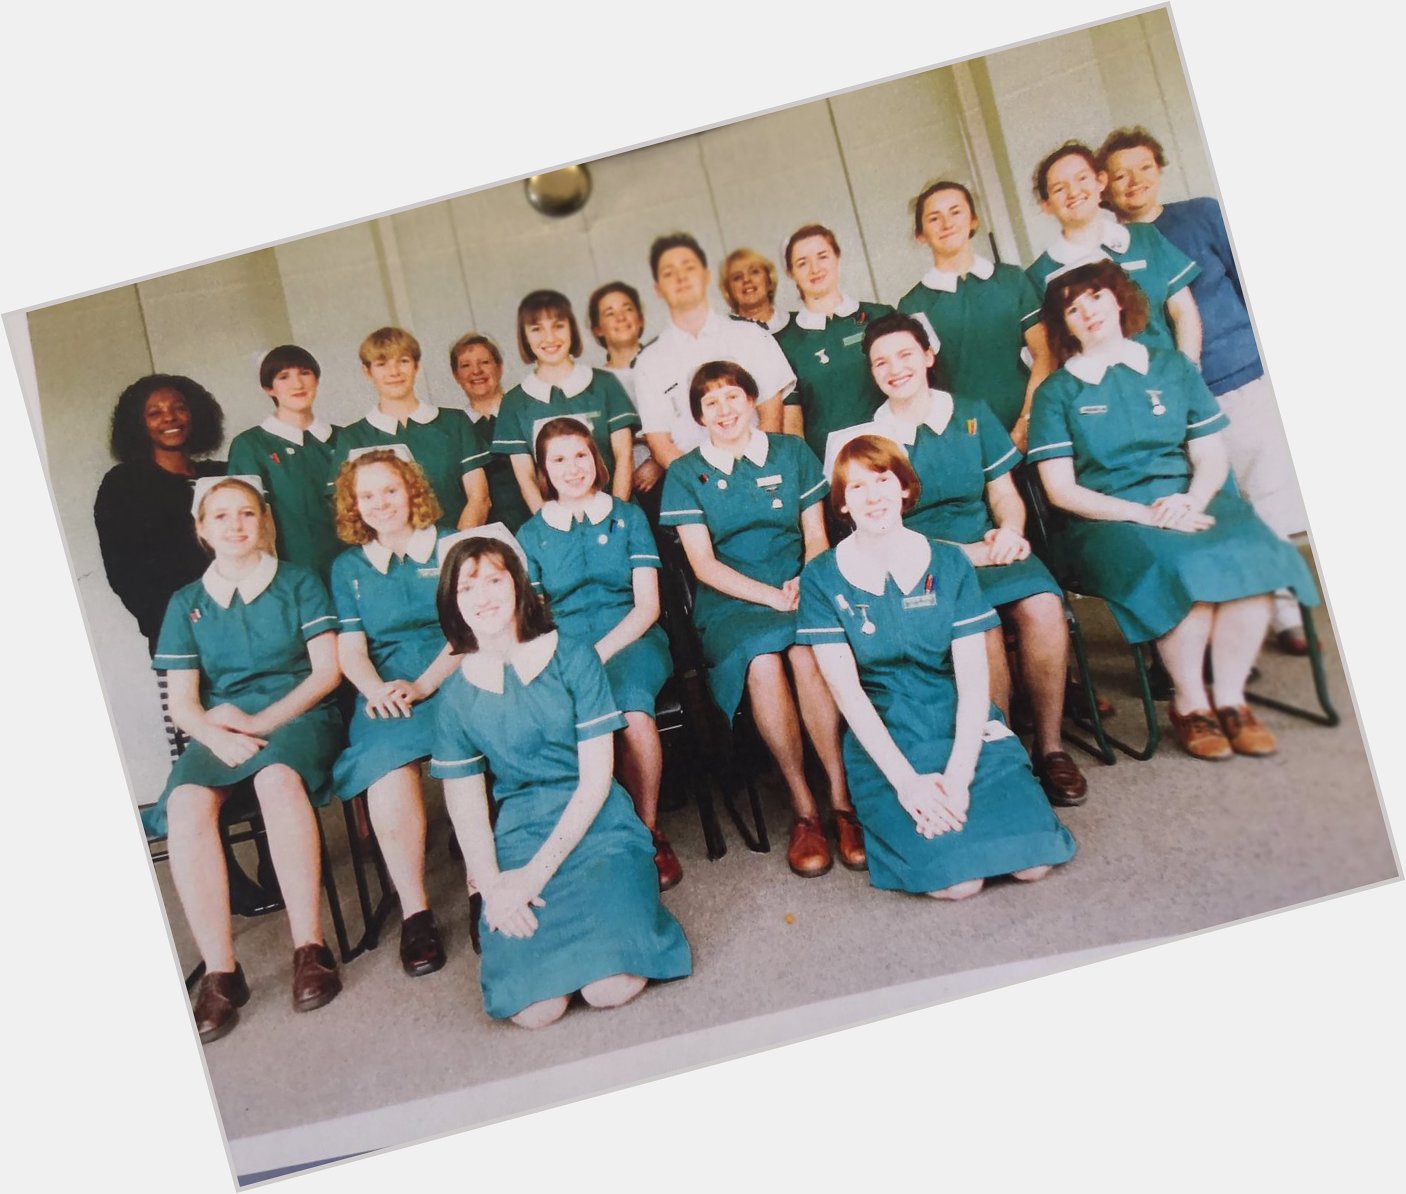 We were living the dream in 1990 with these uniforms! Happy 70th birthday, NHS, you wonderful thing! 